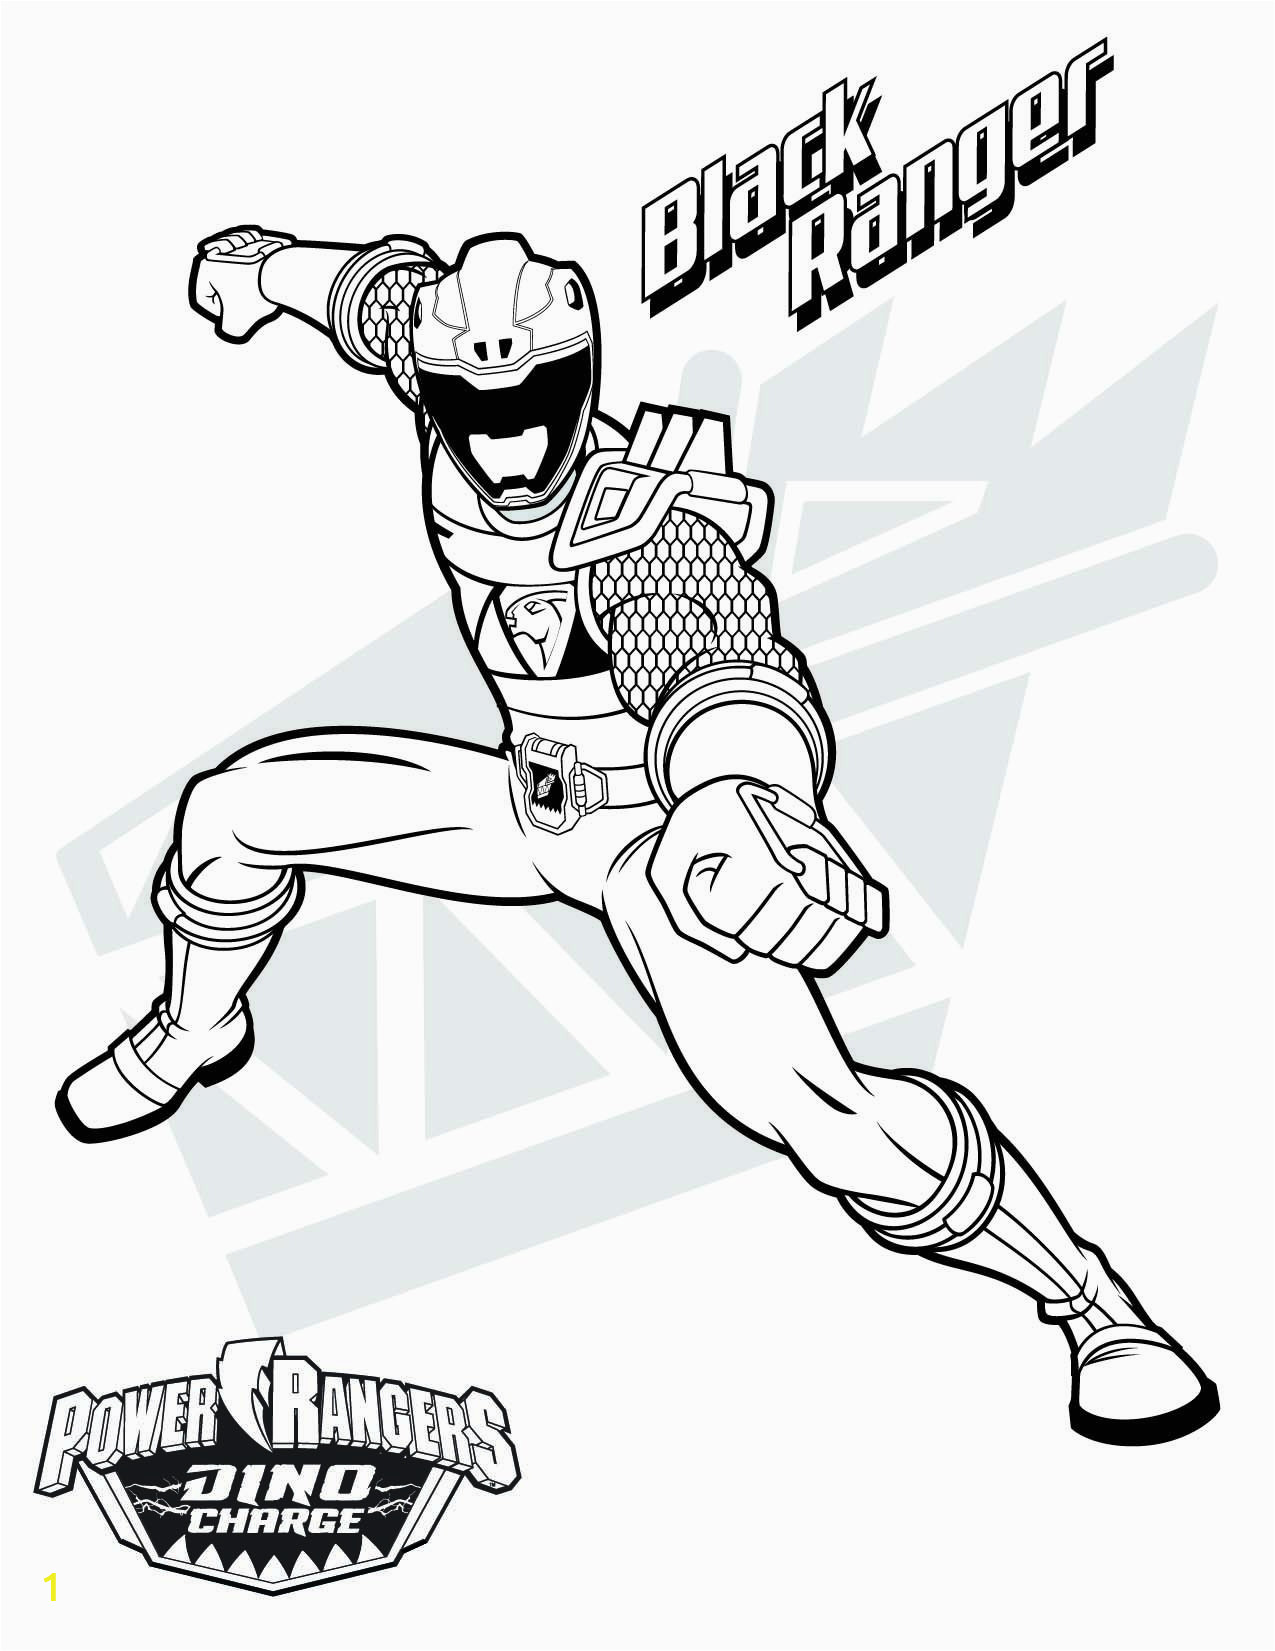 Power Rangers Dino Charge Coloring Pages Black Ranger Download them All Errangers